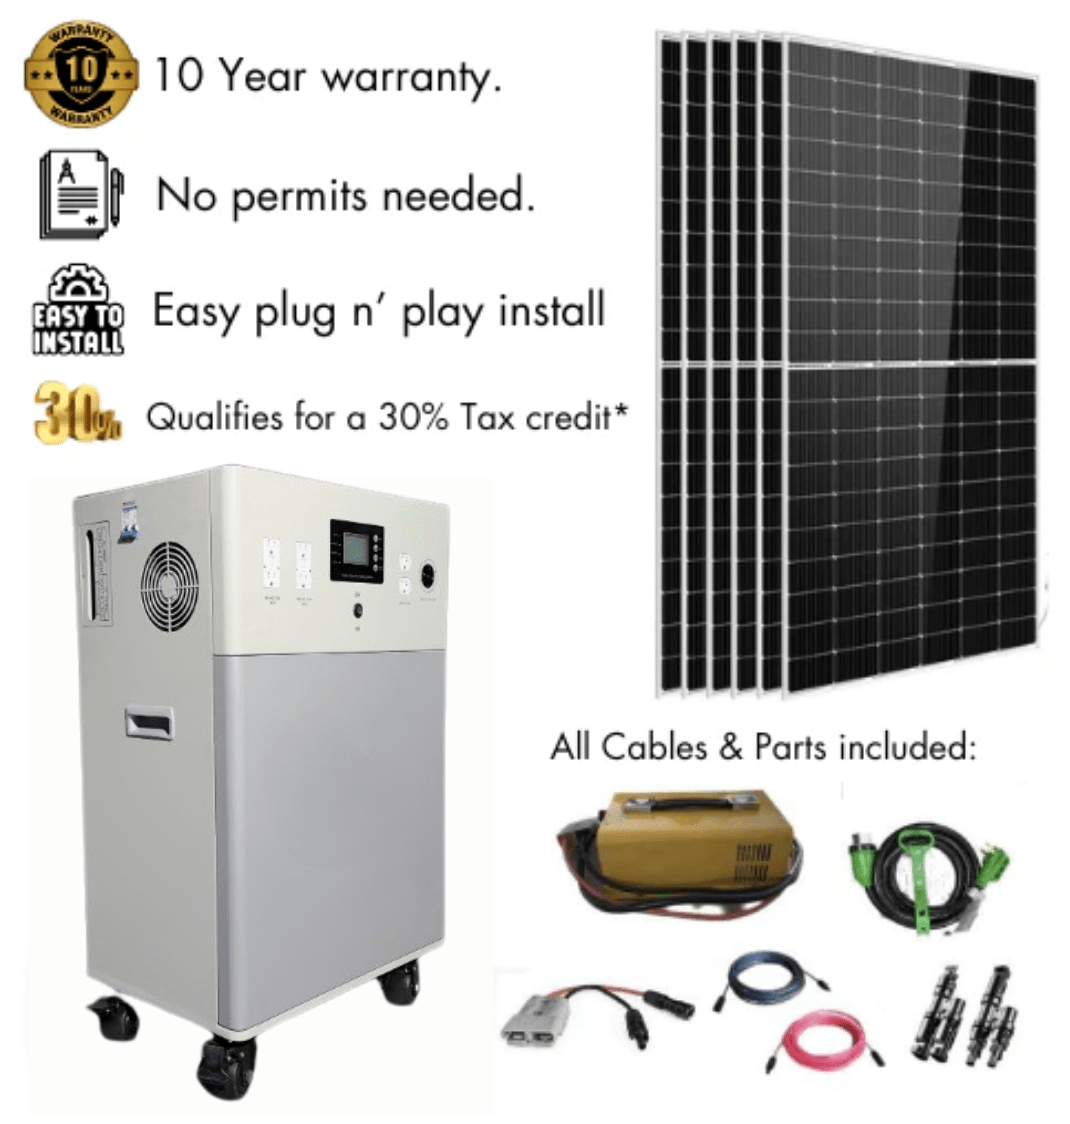 WALRUS Power Station 180Ah 13 kWh AC110/220V 72N +10 Year Warranty | Made in USA *Ships April 2024* SunVoyage